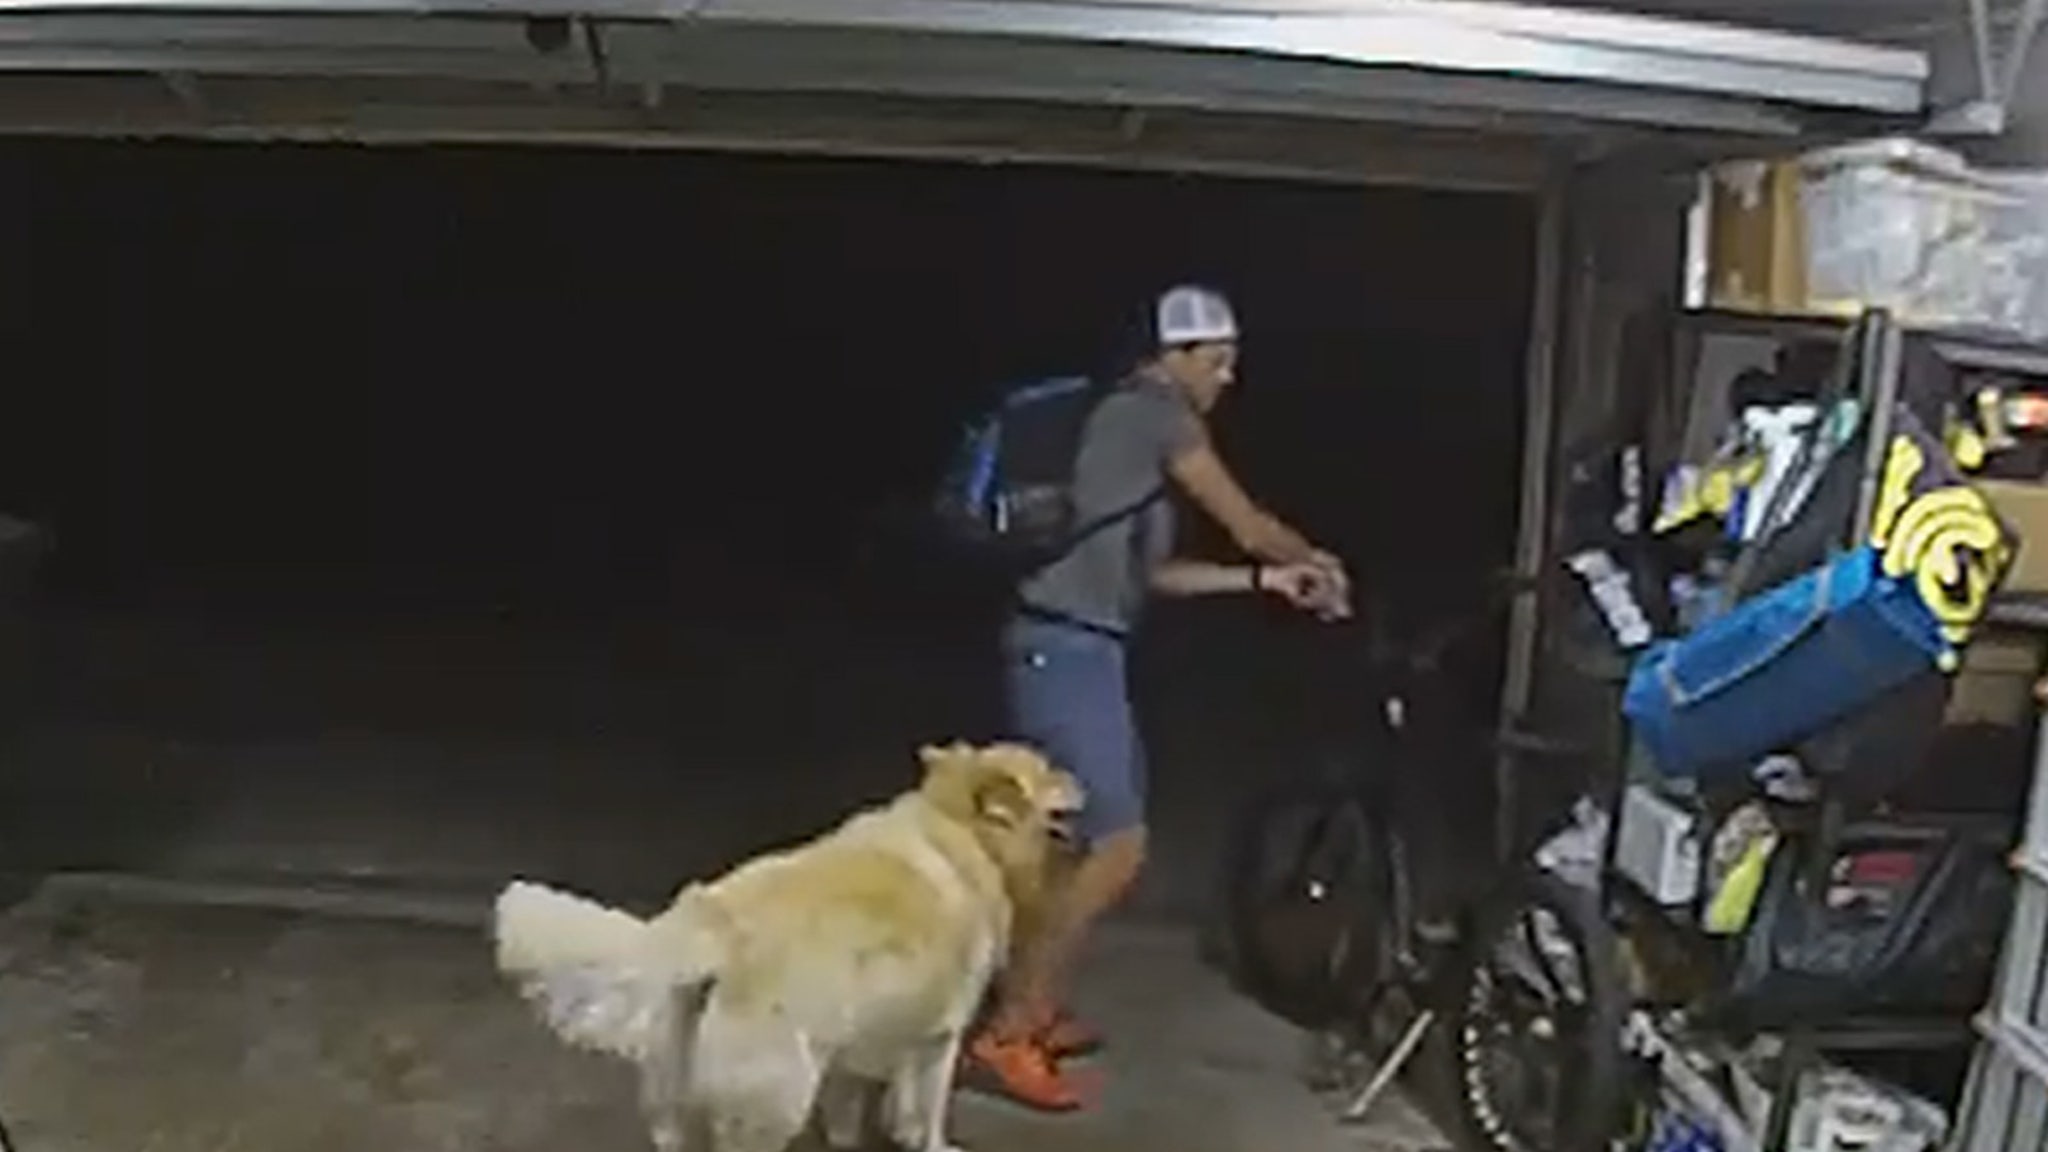 San Diego Bike Thief Briefly Distracted By Friendly Family Dog